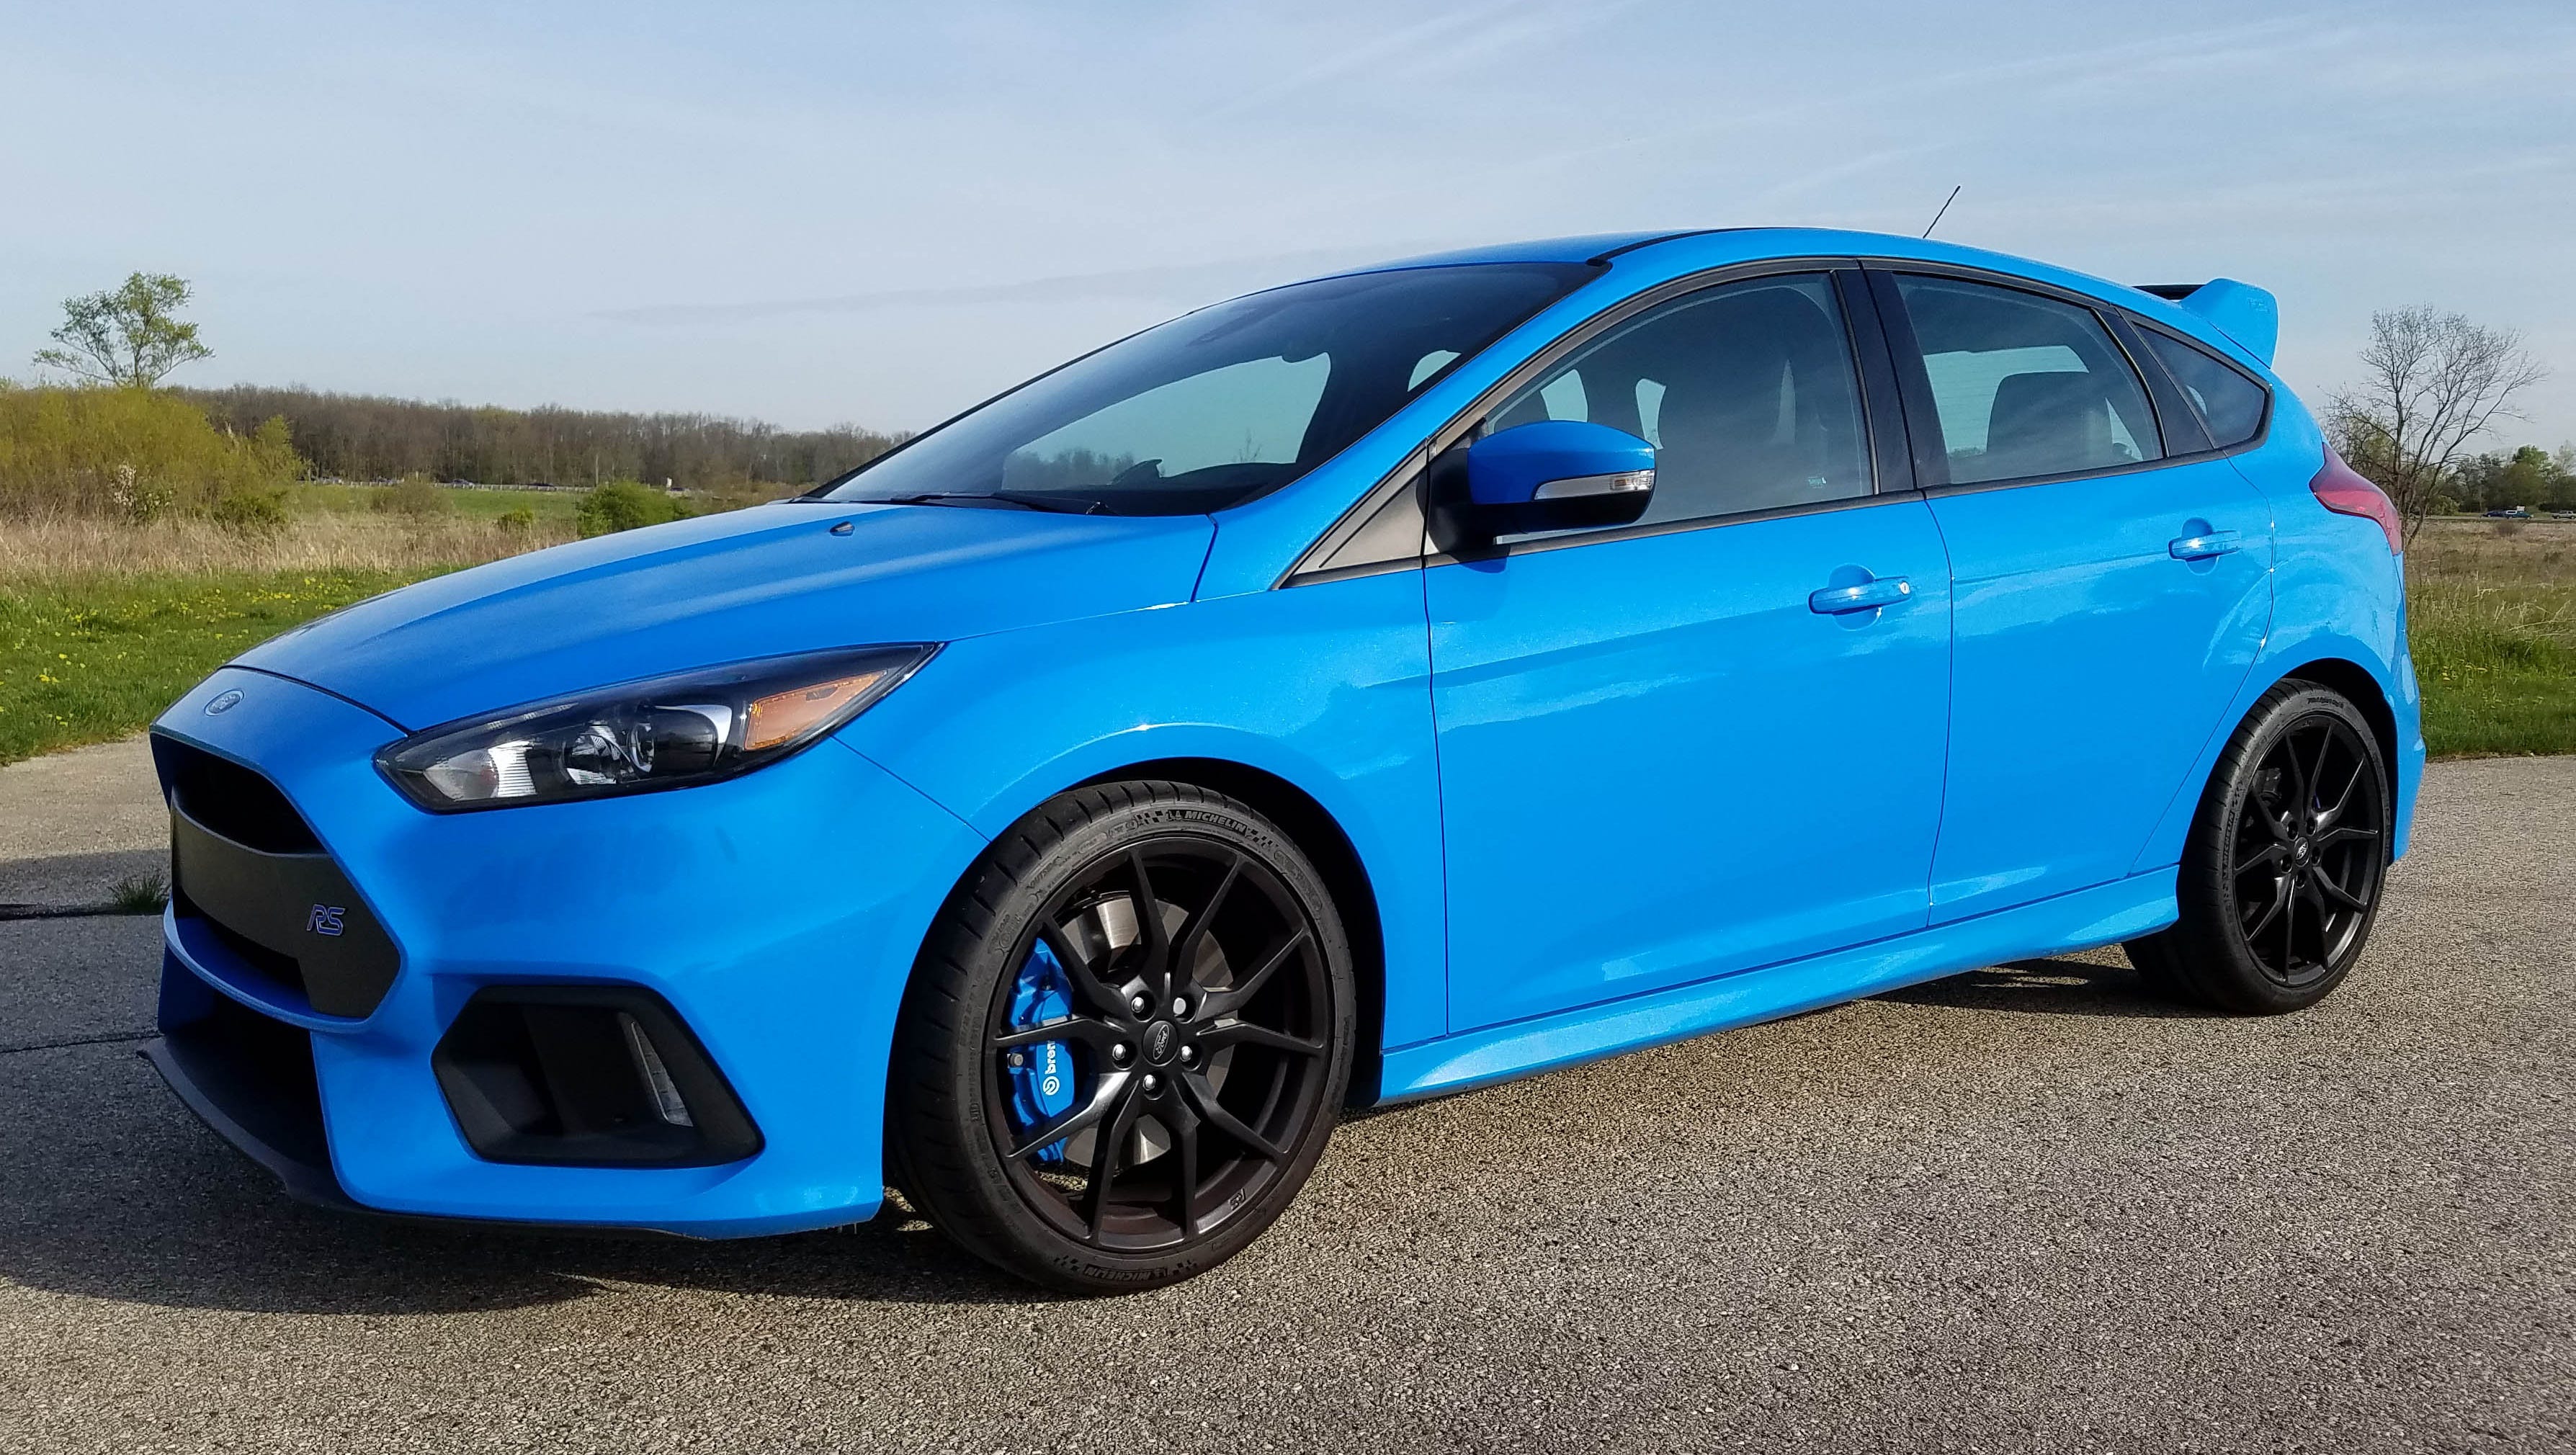 Savage on Wheels: 2017 Ford Focus RS is fast, furious and fun